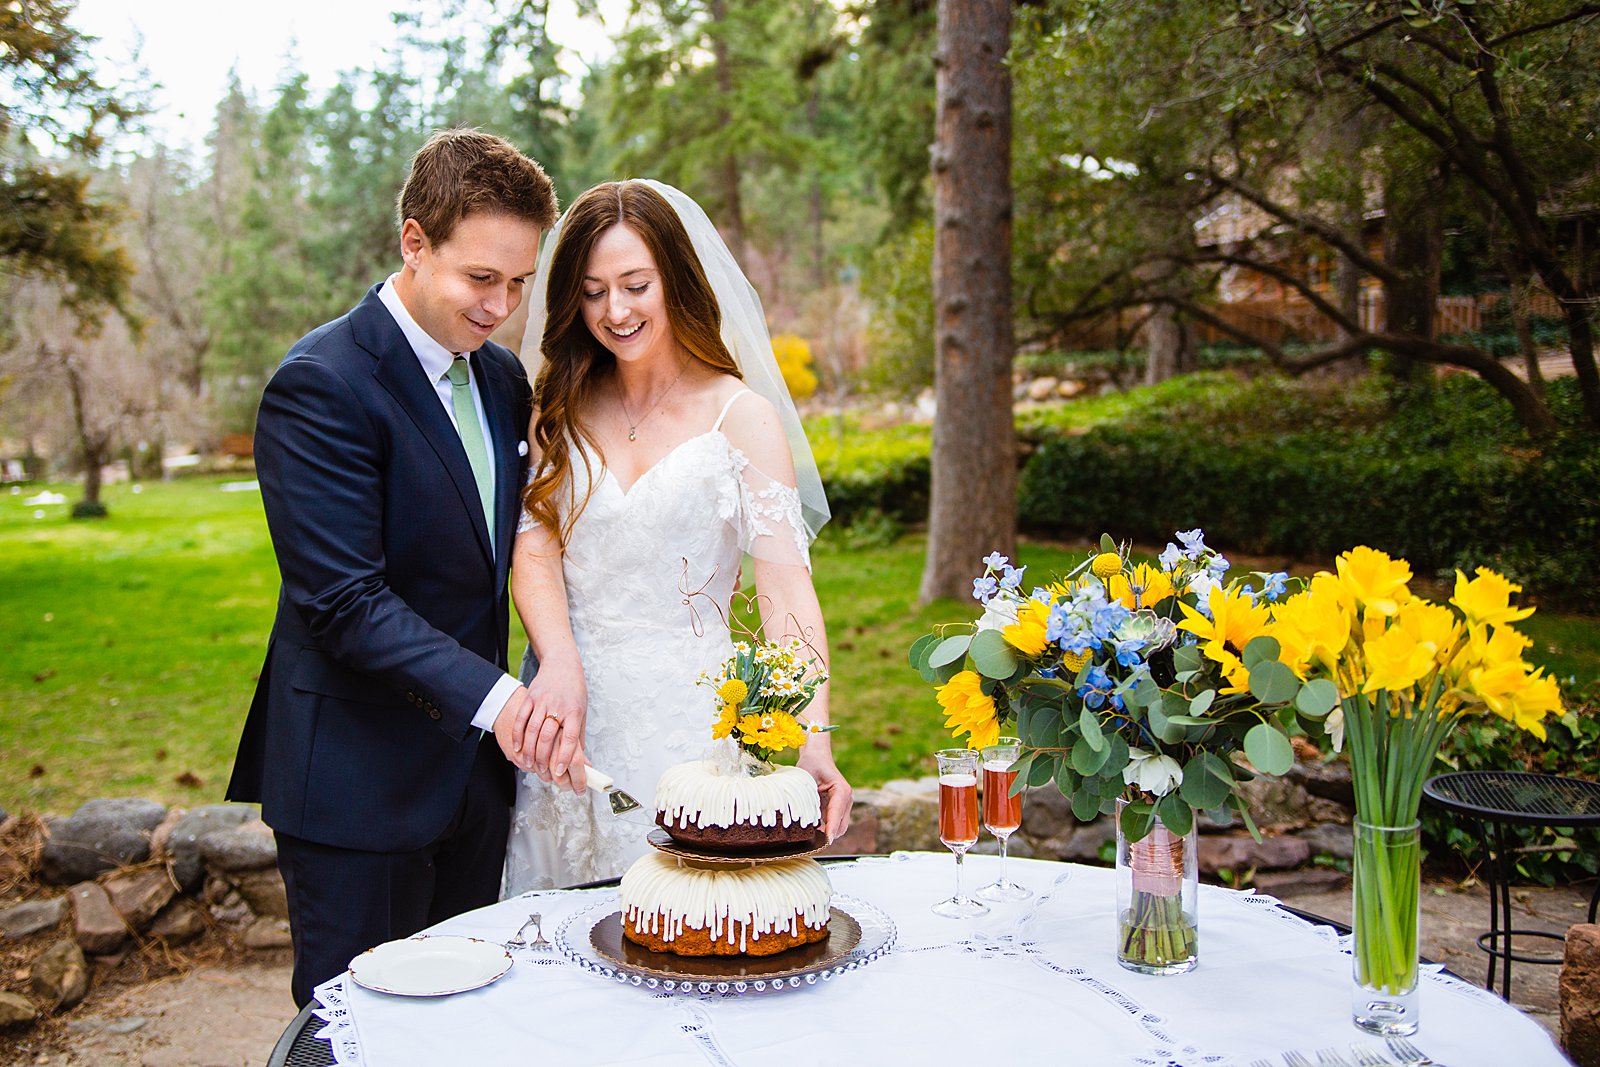 Bride and Groom share wedding cake at their Sedona elopement by Arizona elopement photographer PMA Photography.